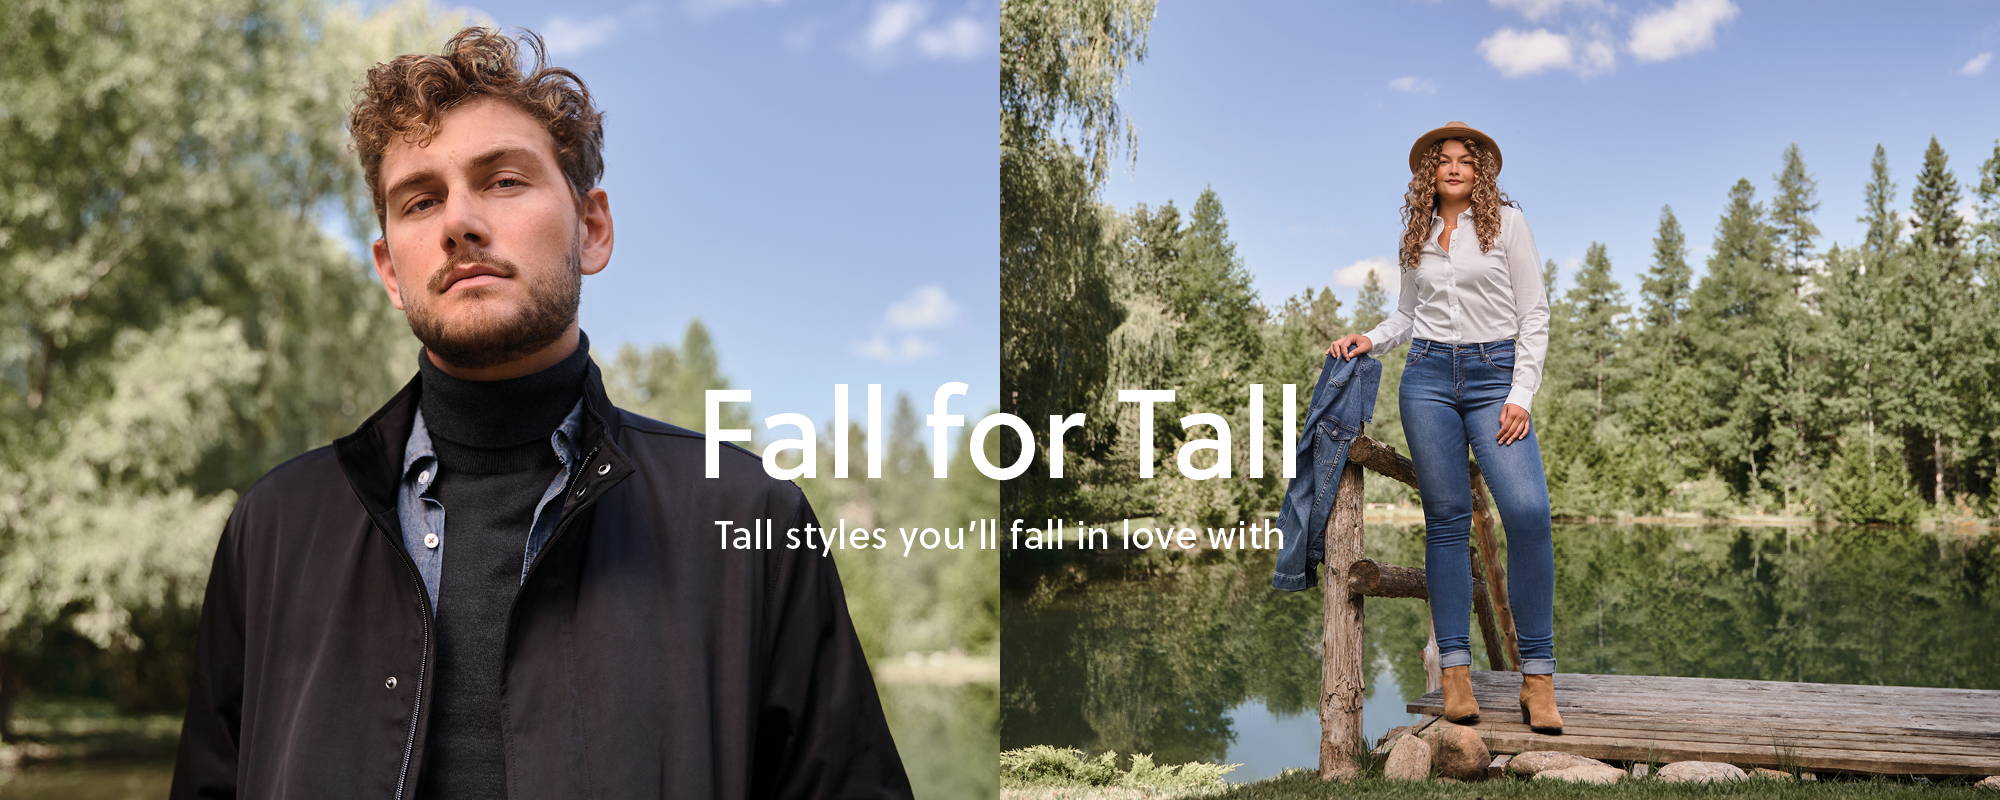 Fall for Tall. Tall styles you'll fall in love with by American Tall.